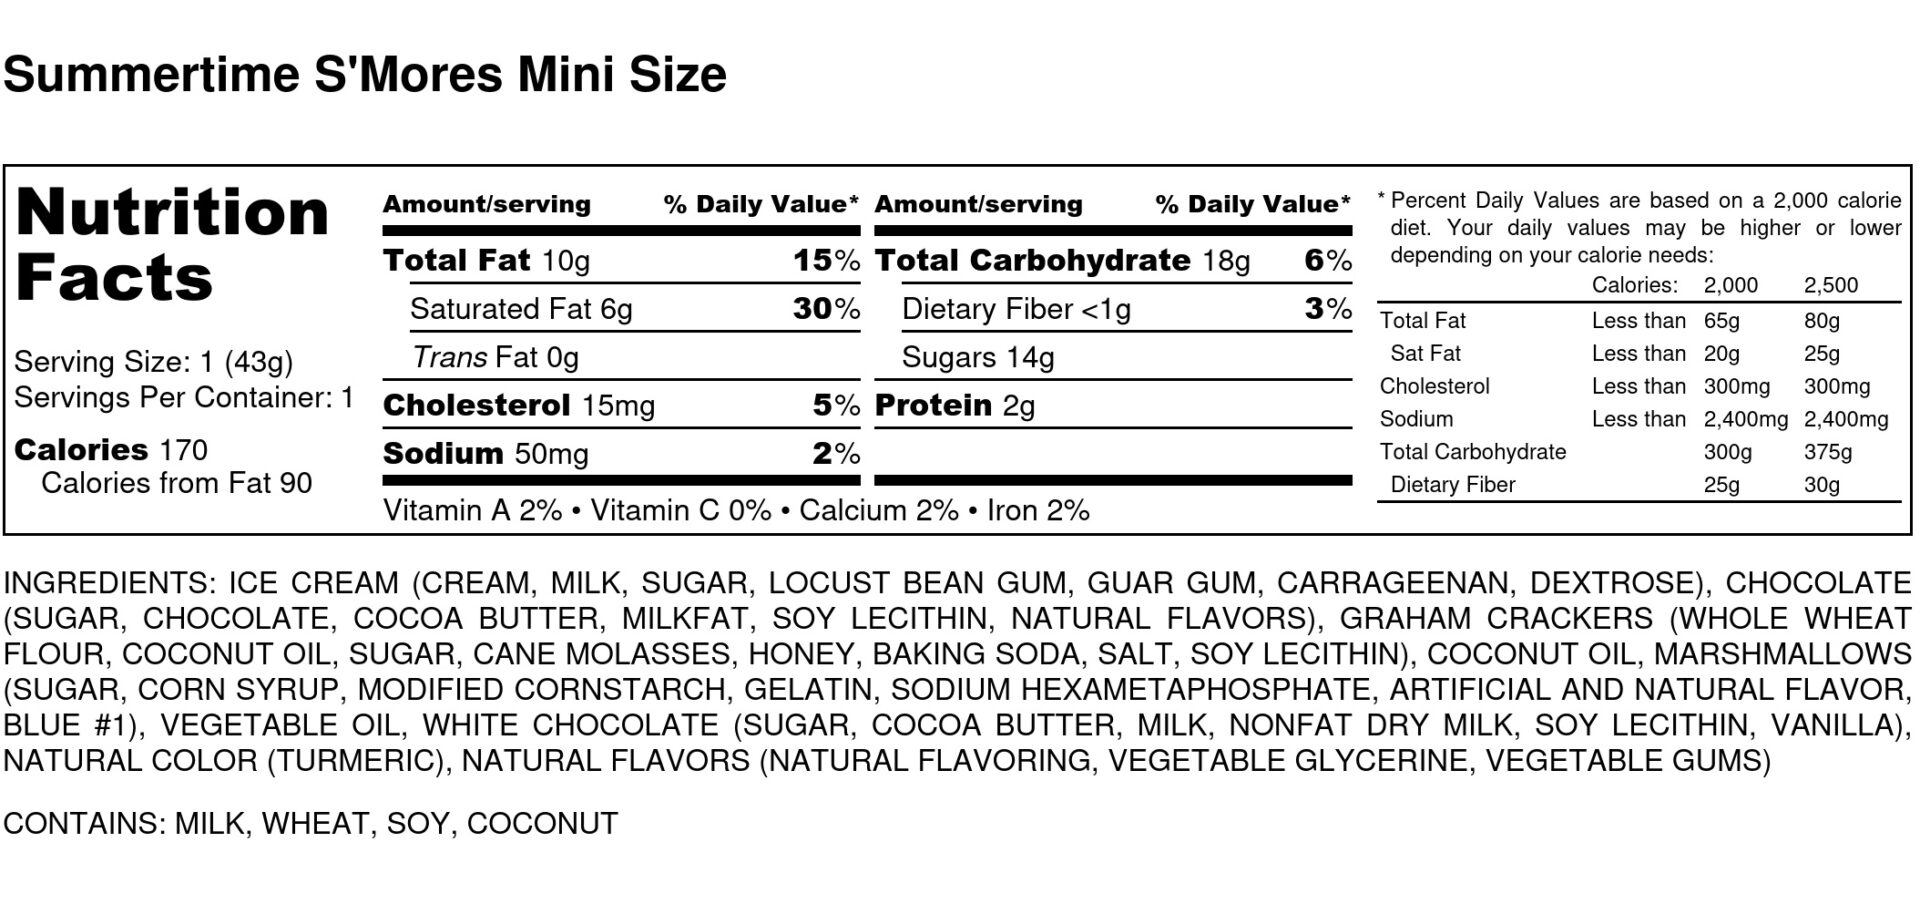 Summertime SMores Mini Size Nutrition Label scaled